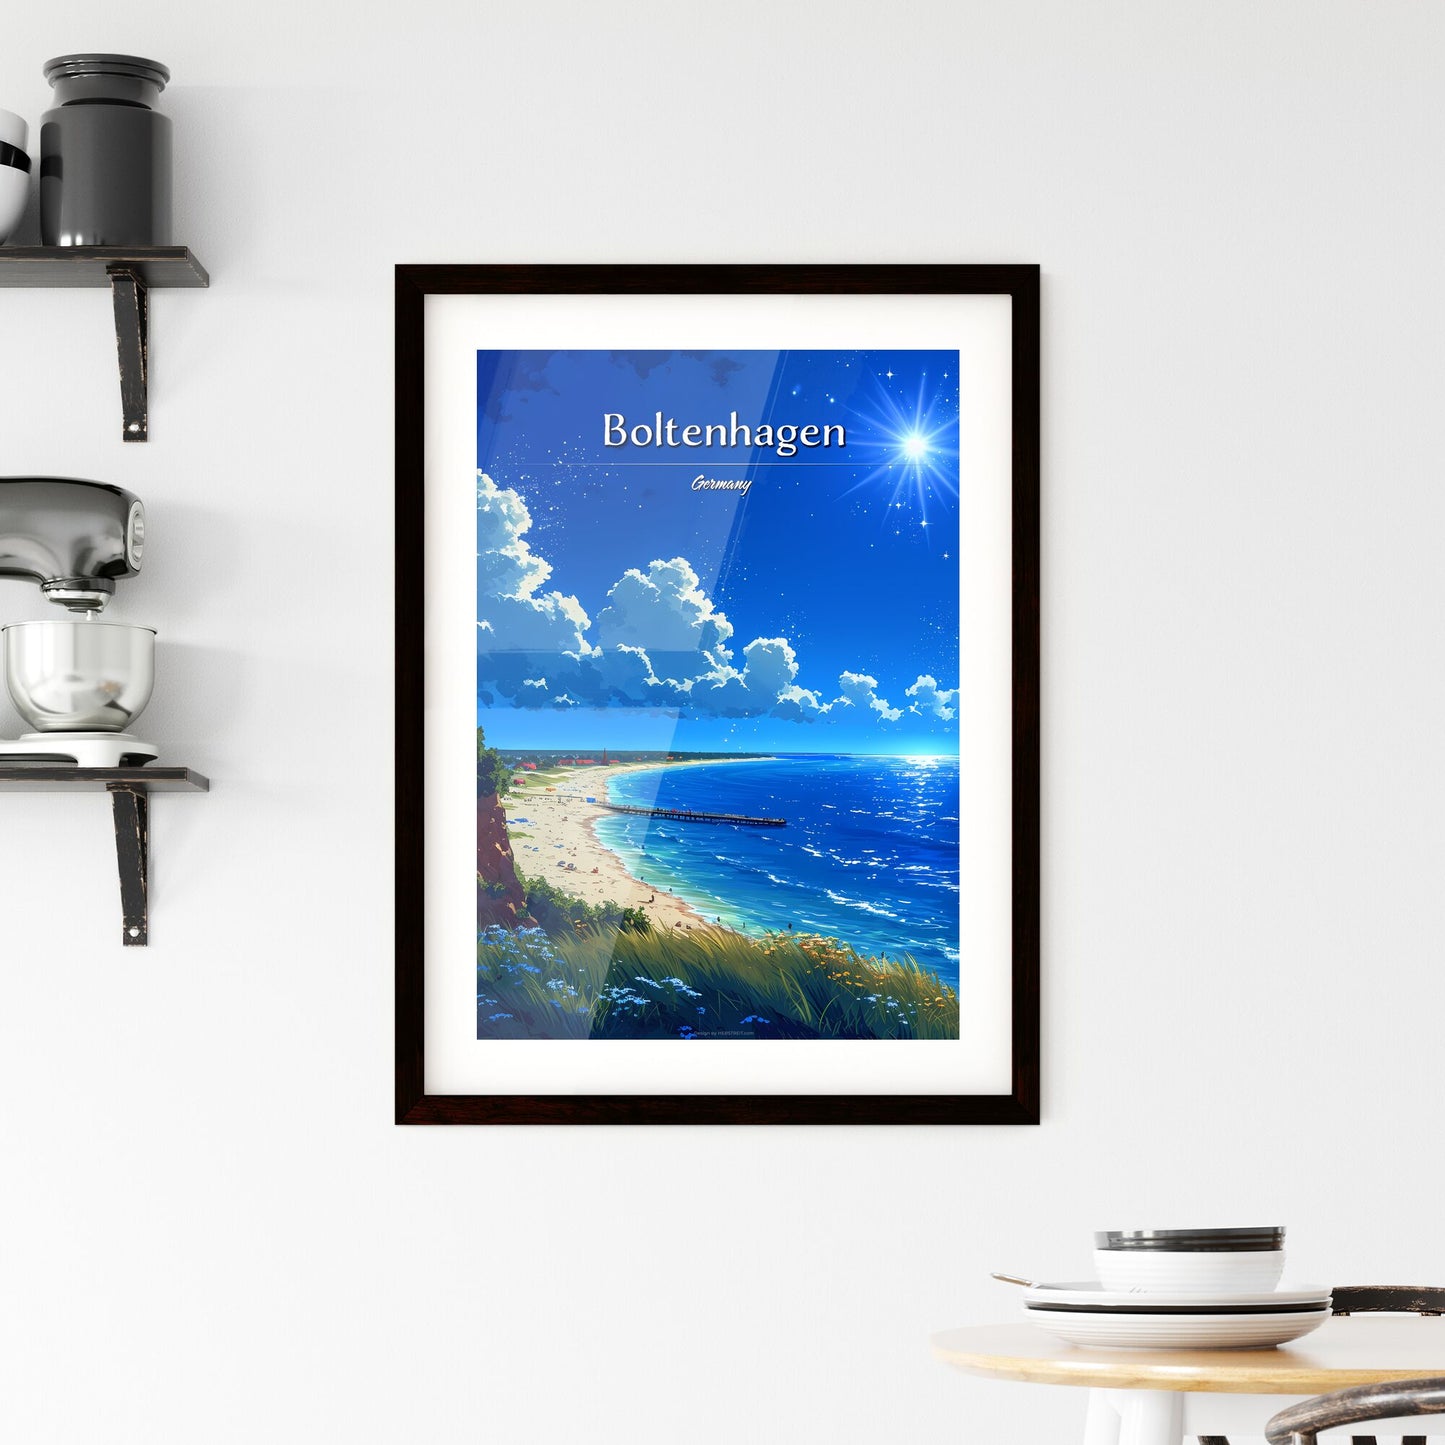 Boltenhagen Beach, Germany (Baltic Sea) - Art print of a beach with a dock and a body of water Default Title